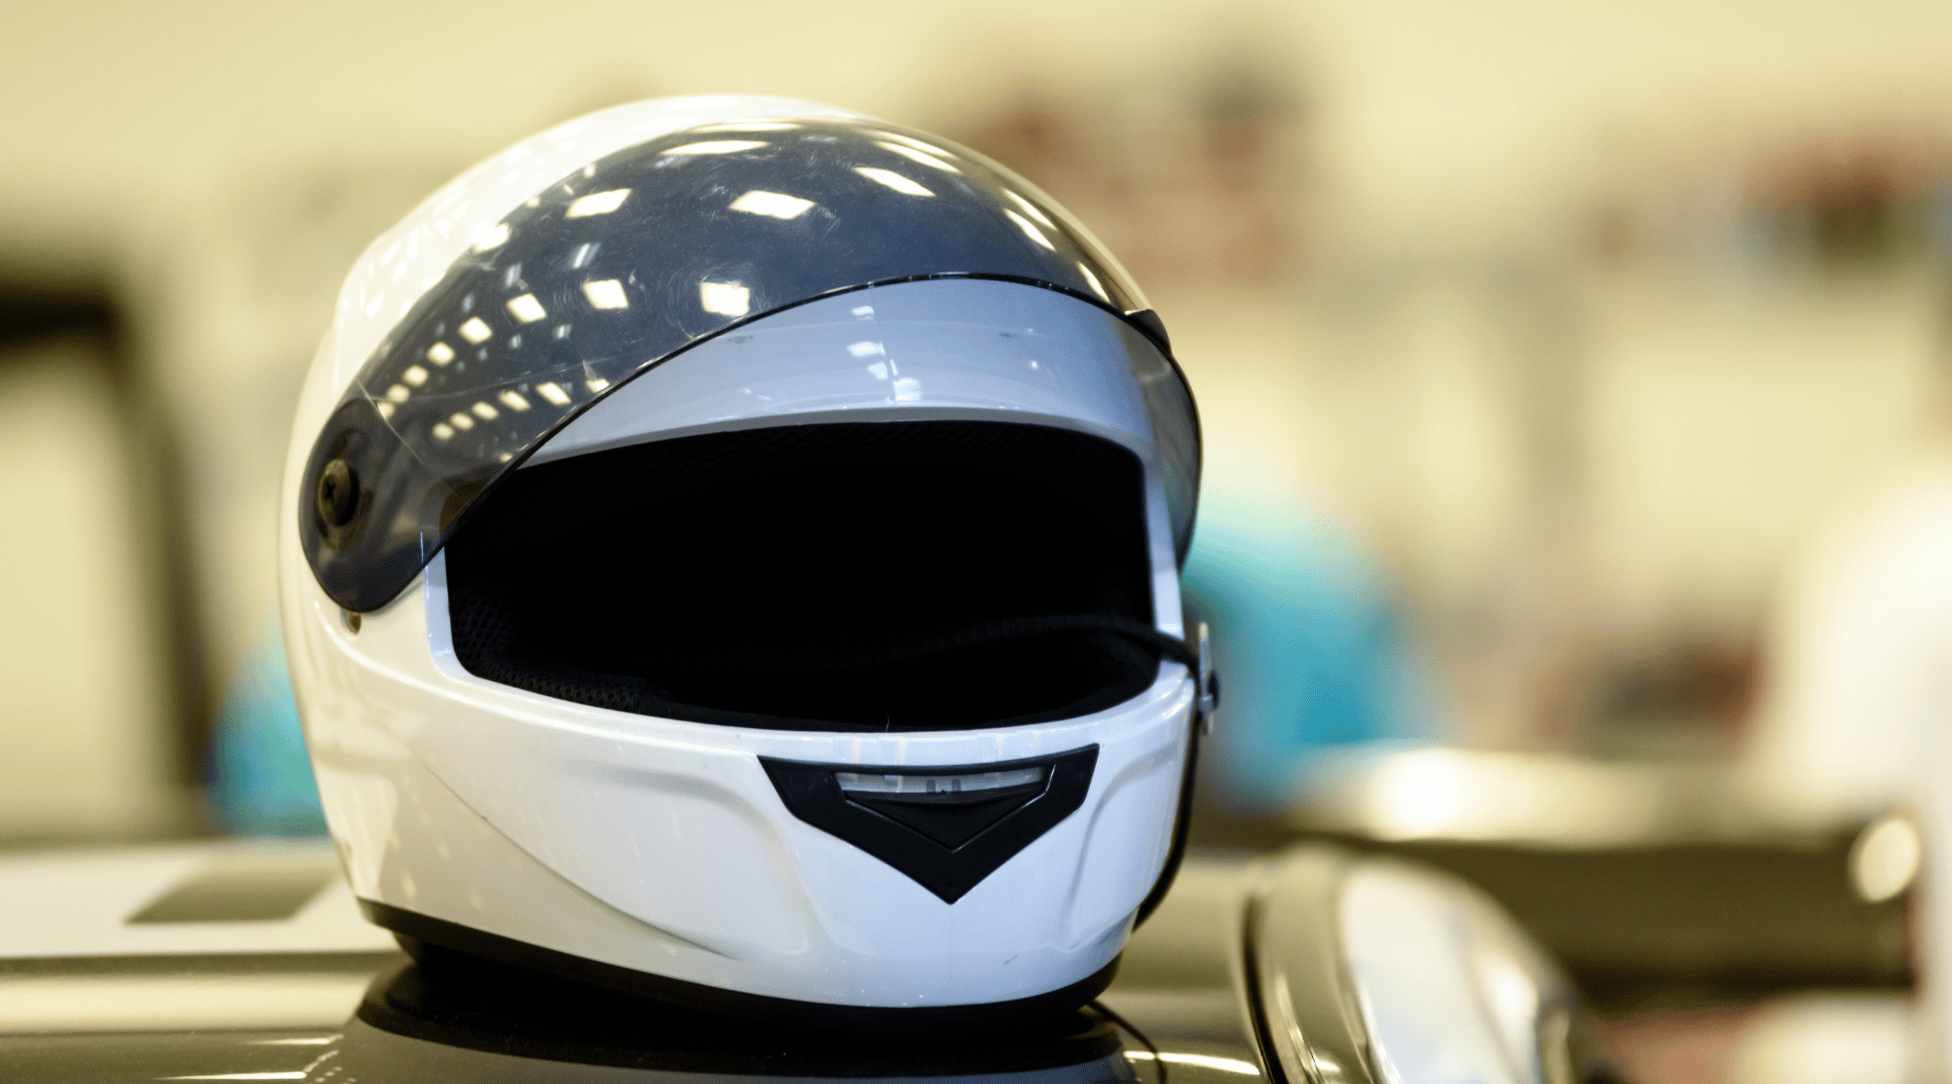 motorcycle helmet with tinted or shaded visor